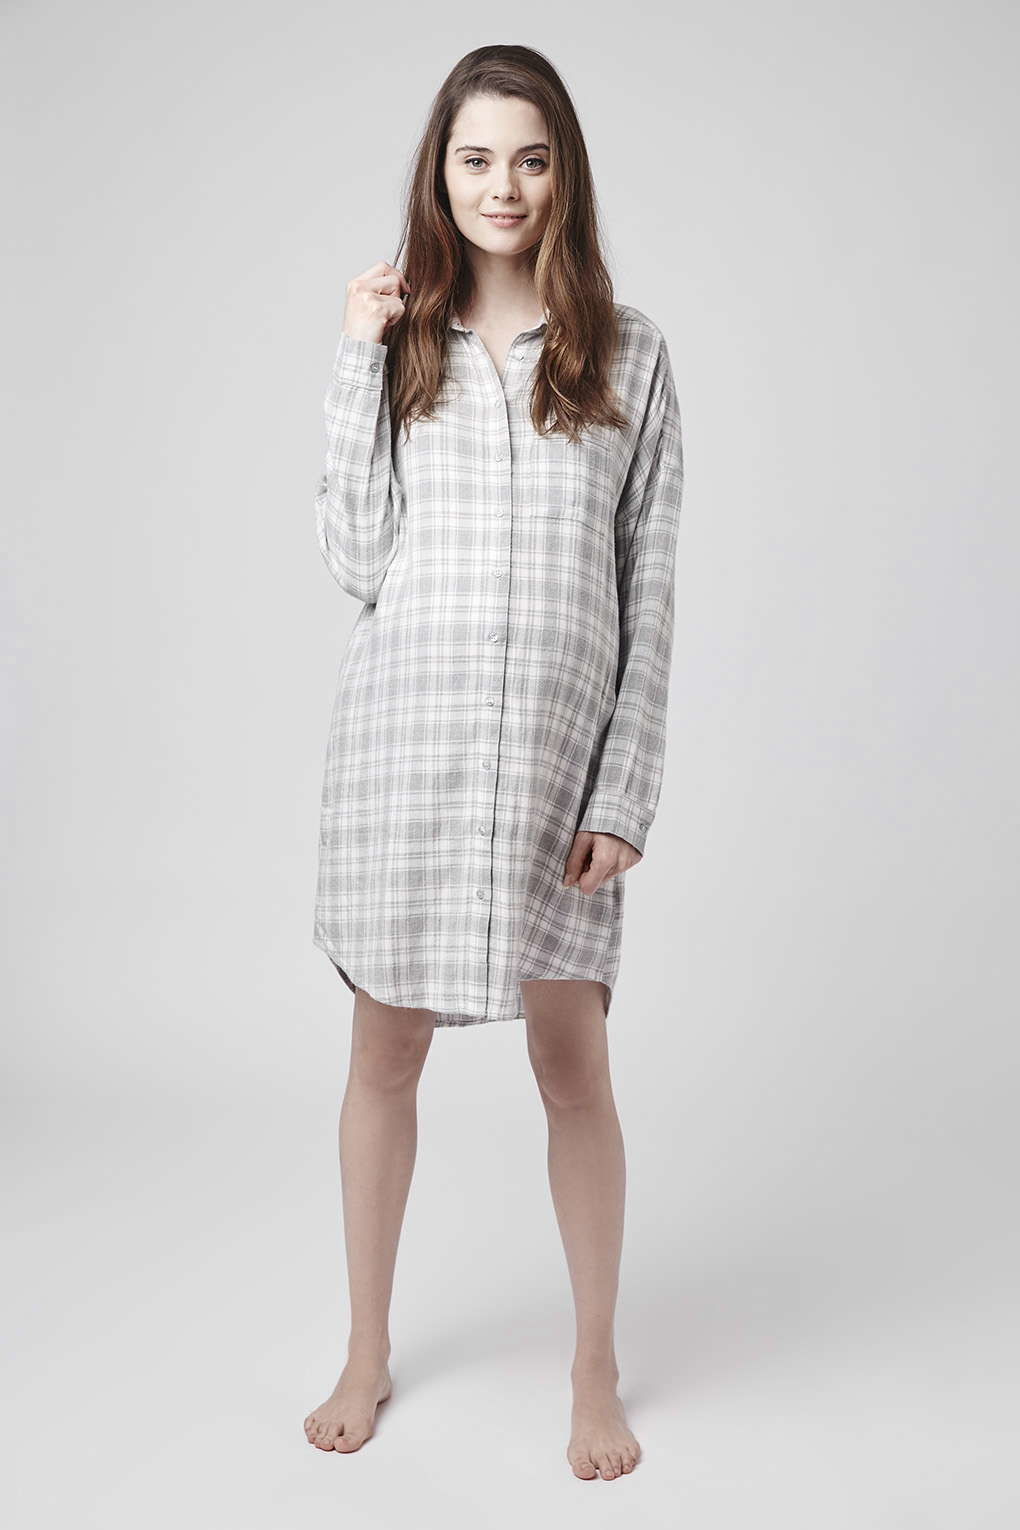 9 Best Comfortable Maternity Nightwear Clothes